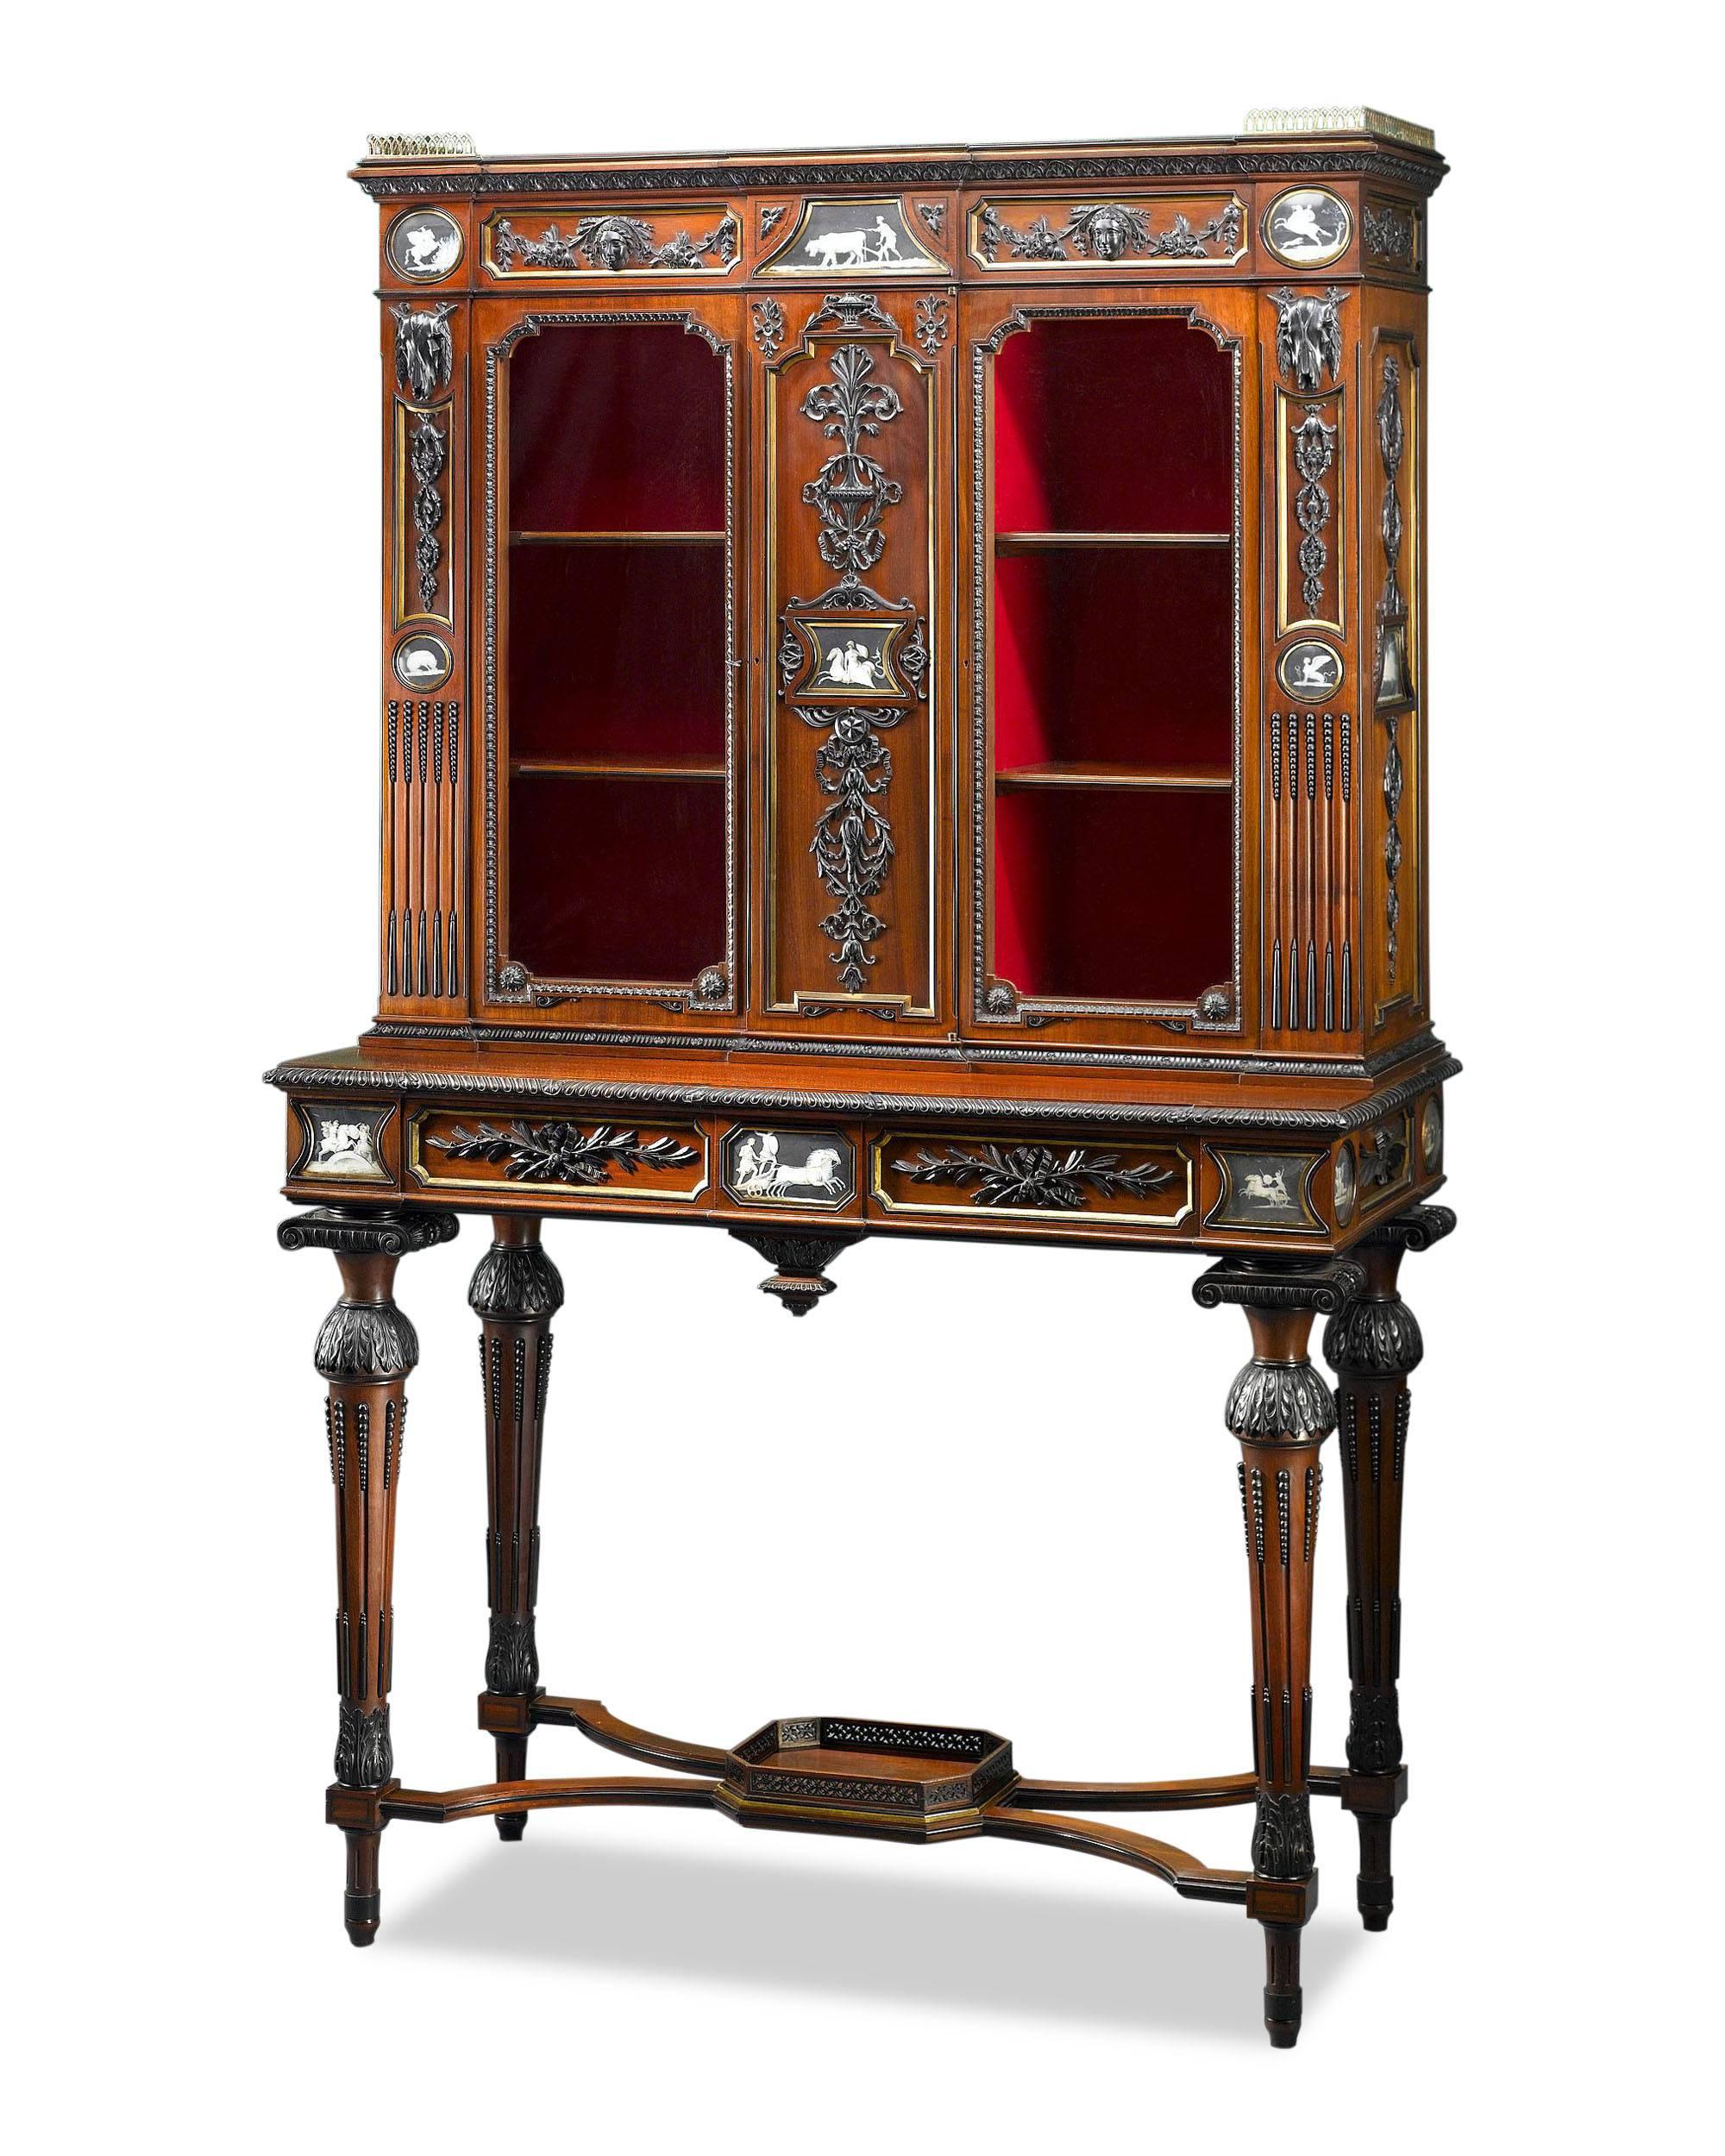 Etruscan Revival 19th Century English Etruscan-Style Cabinet